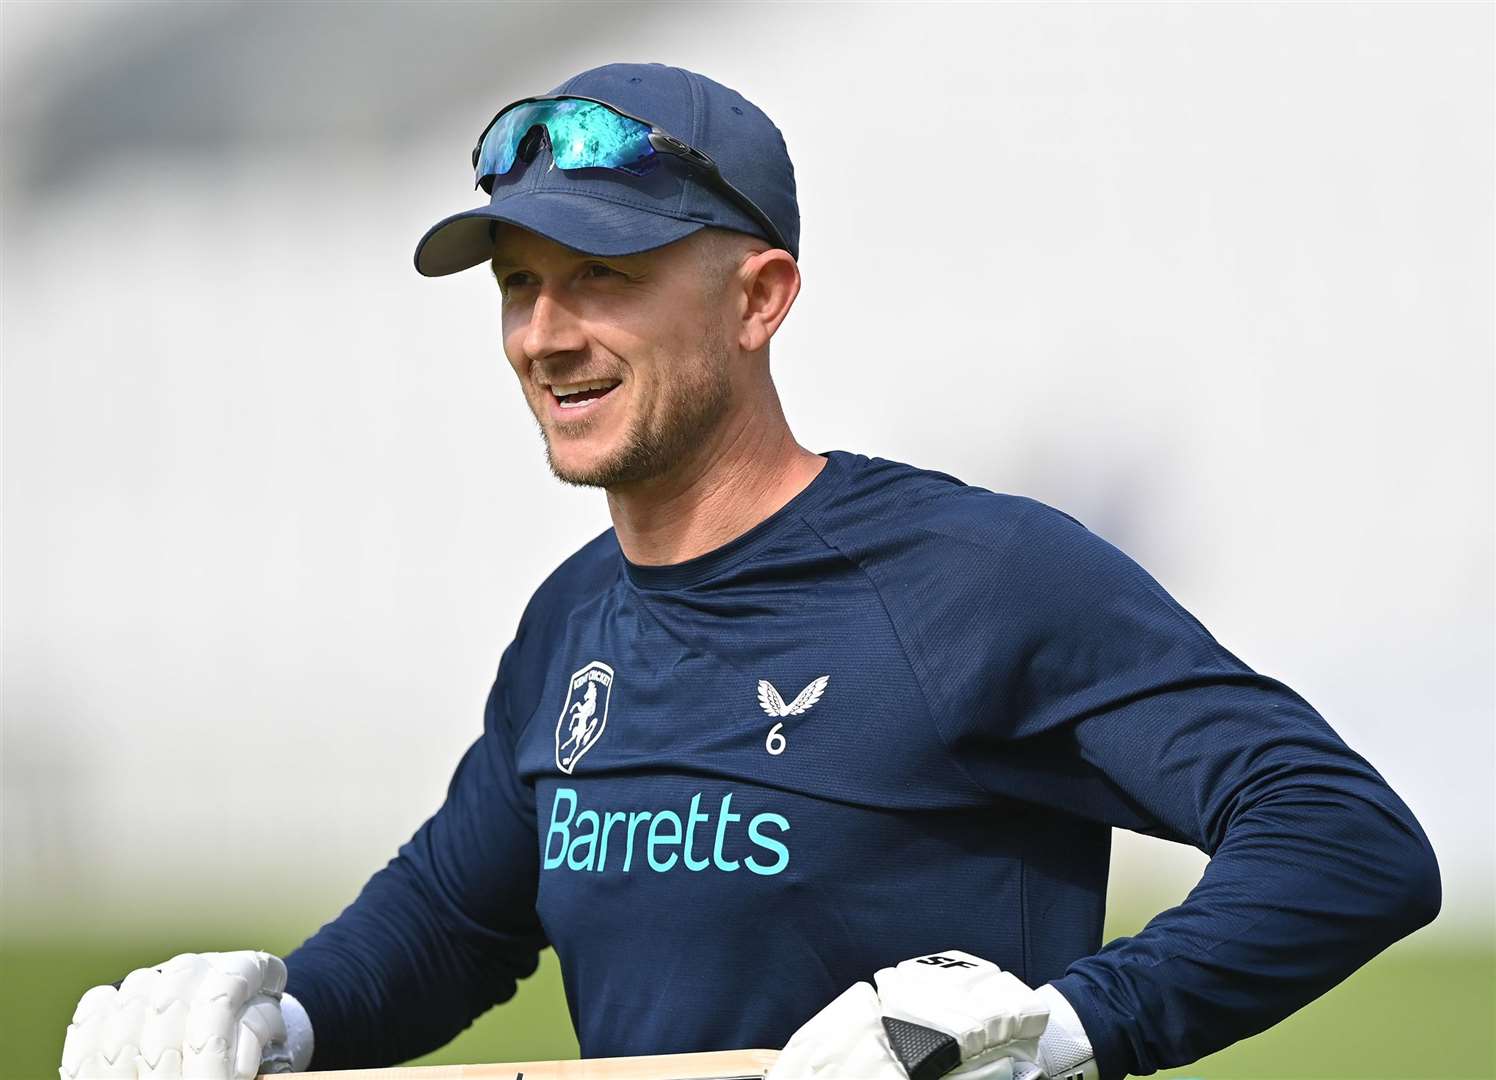 Joe Denly is at the helm for Kent's Royal London Cup bid. Picture: Keith Gillard